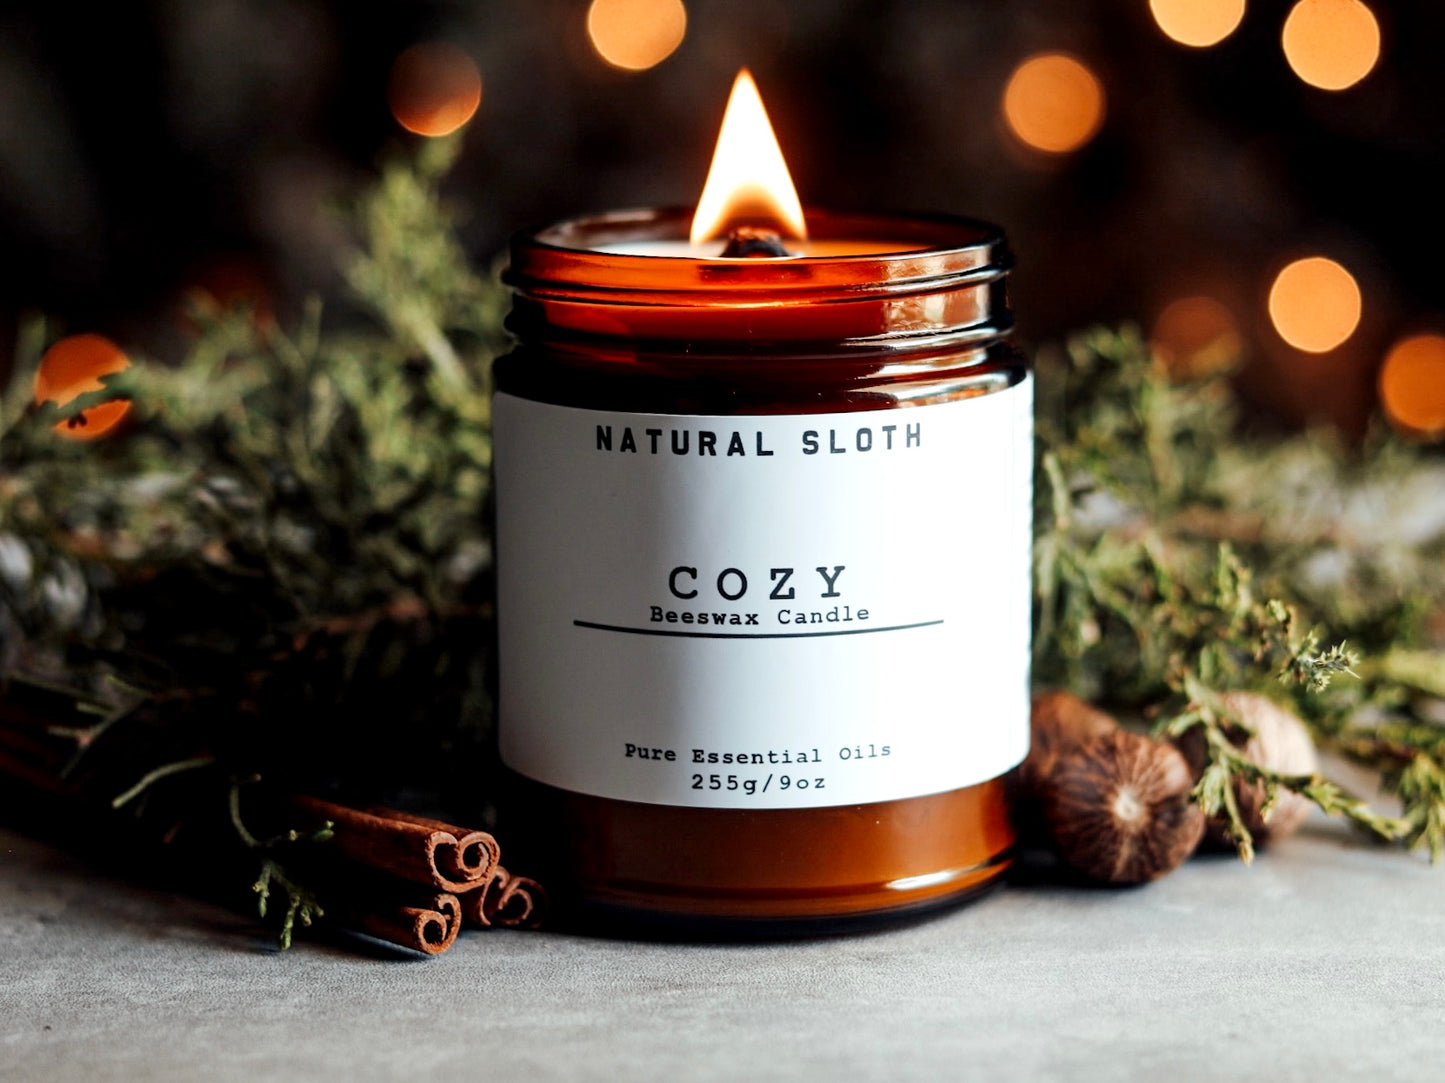 Cozy Beeswax Candles with Essential Oils